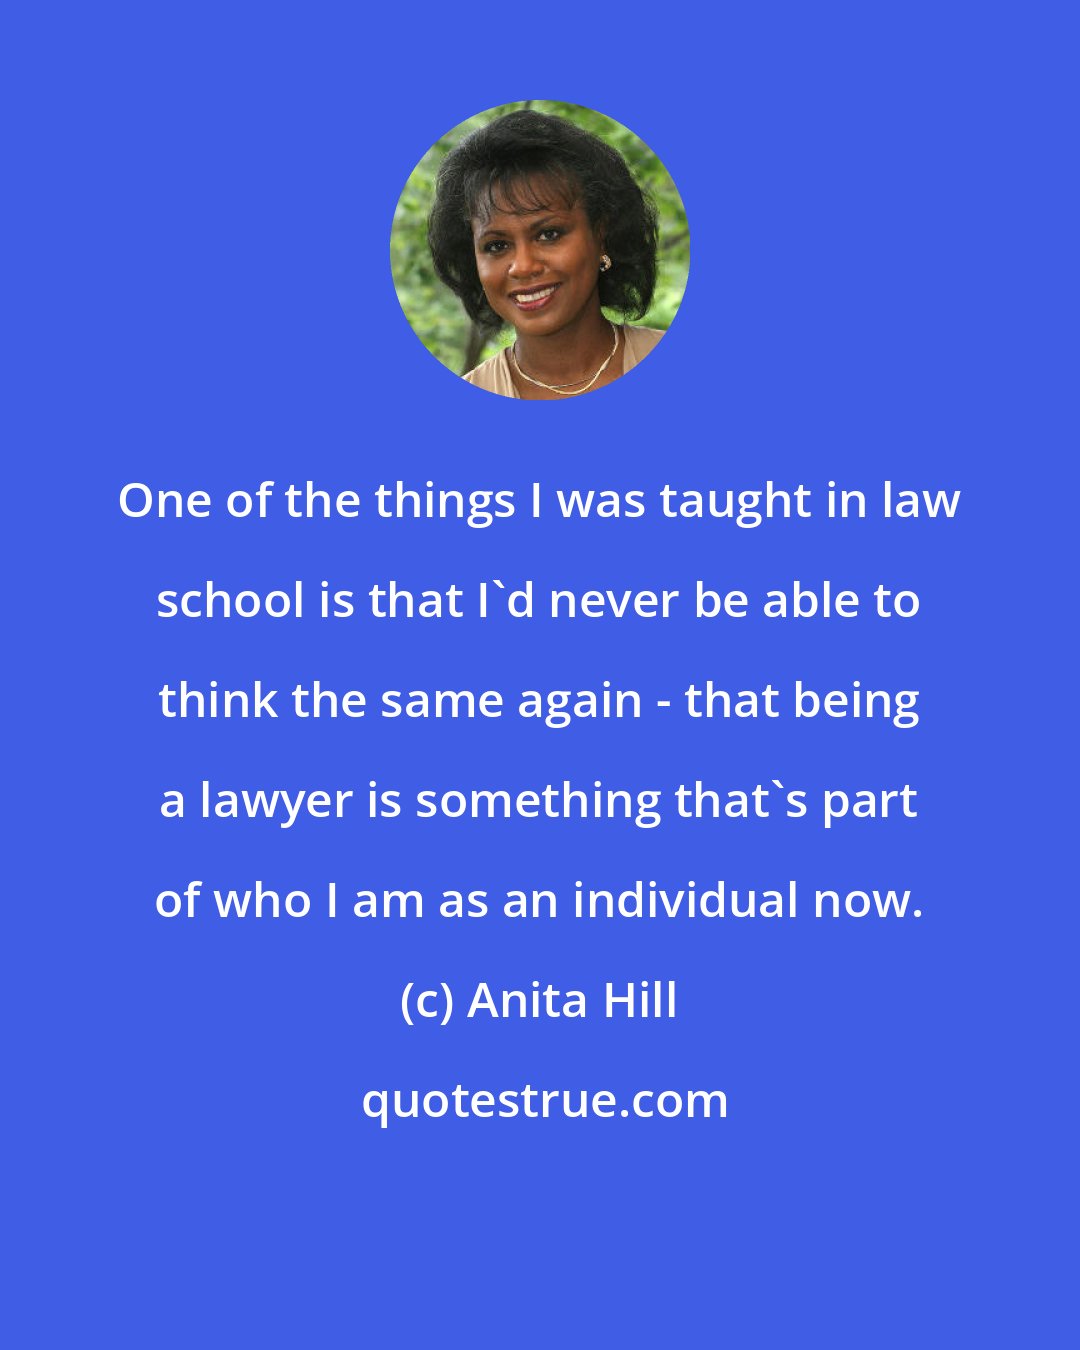 Anita Hill: One of the things I was taught in law school is that I'd never be able to think the same again - that being a lawyer is something that's part of who I am as an individual now.